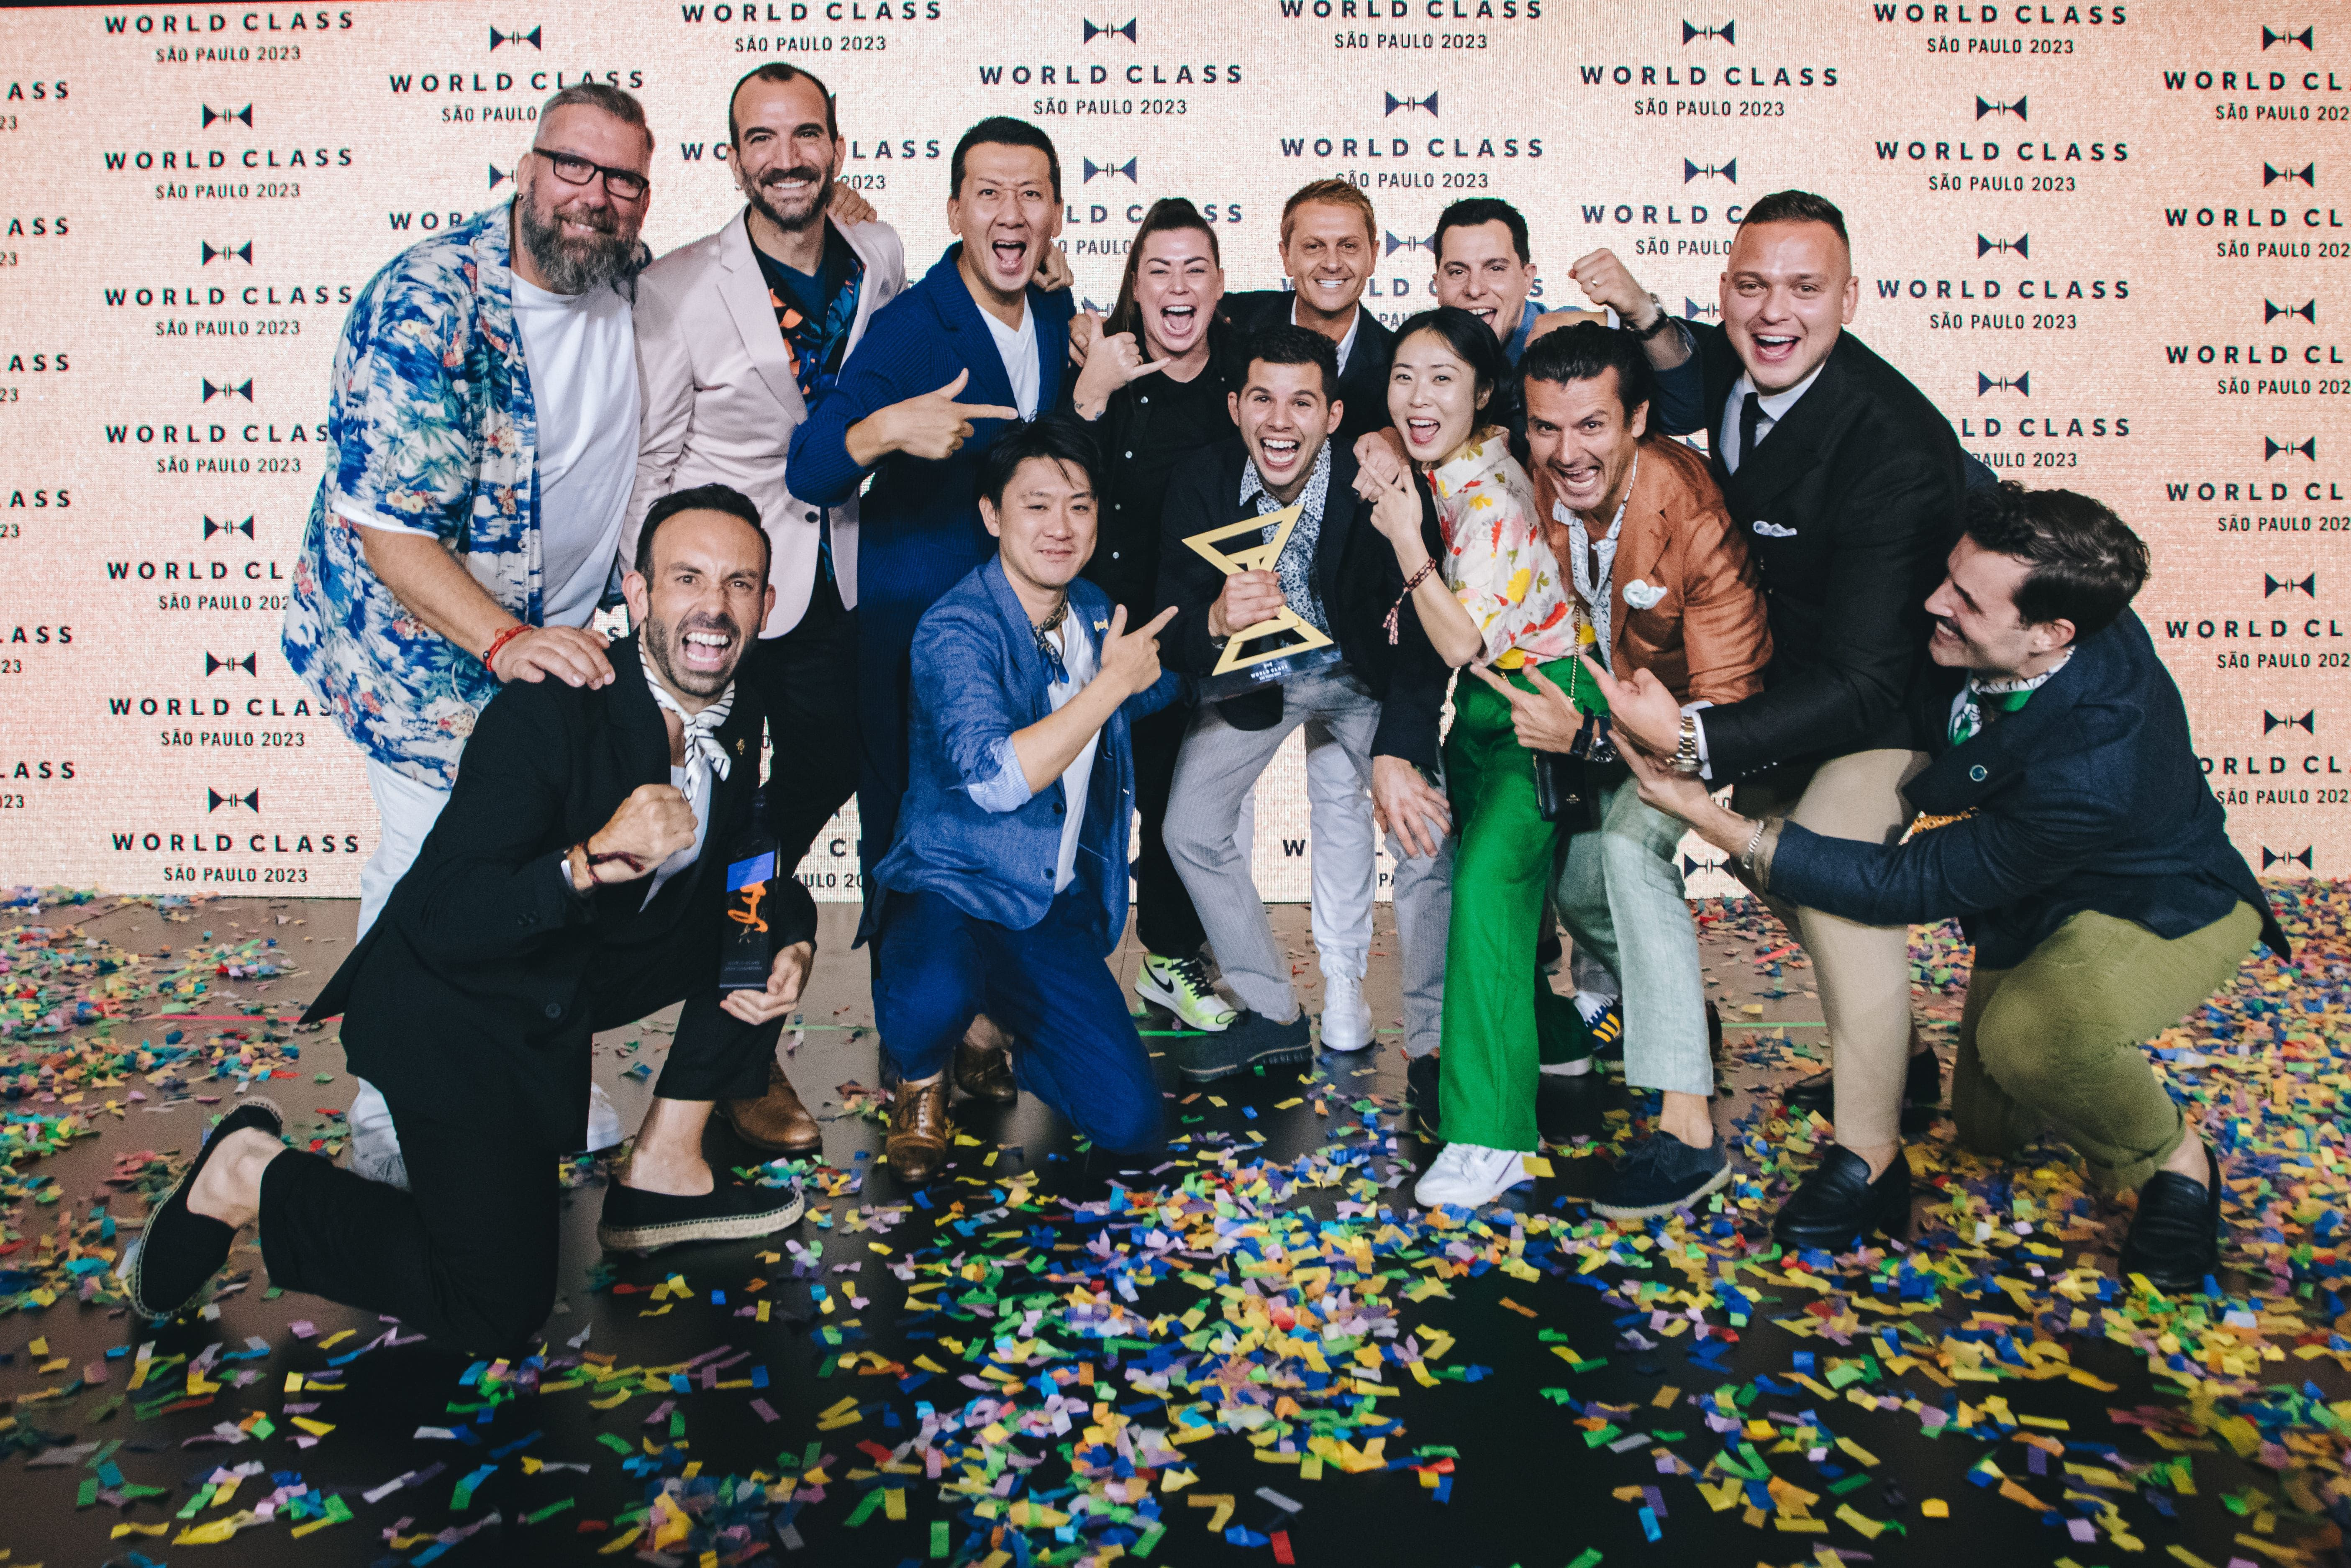 Jacob Martin from Canada is crowned winner of the World Class Global Bartender of the Year 2023 and celebrates with previous World Class winners.